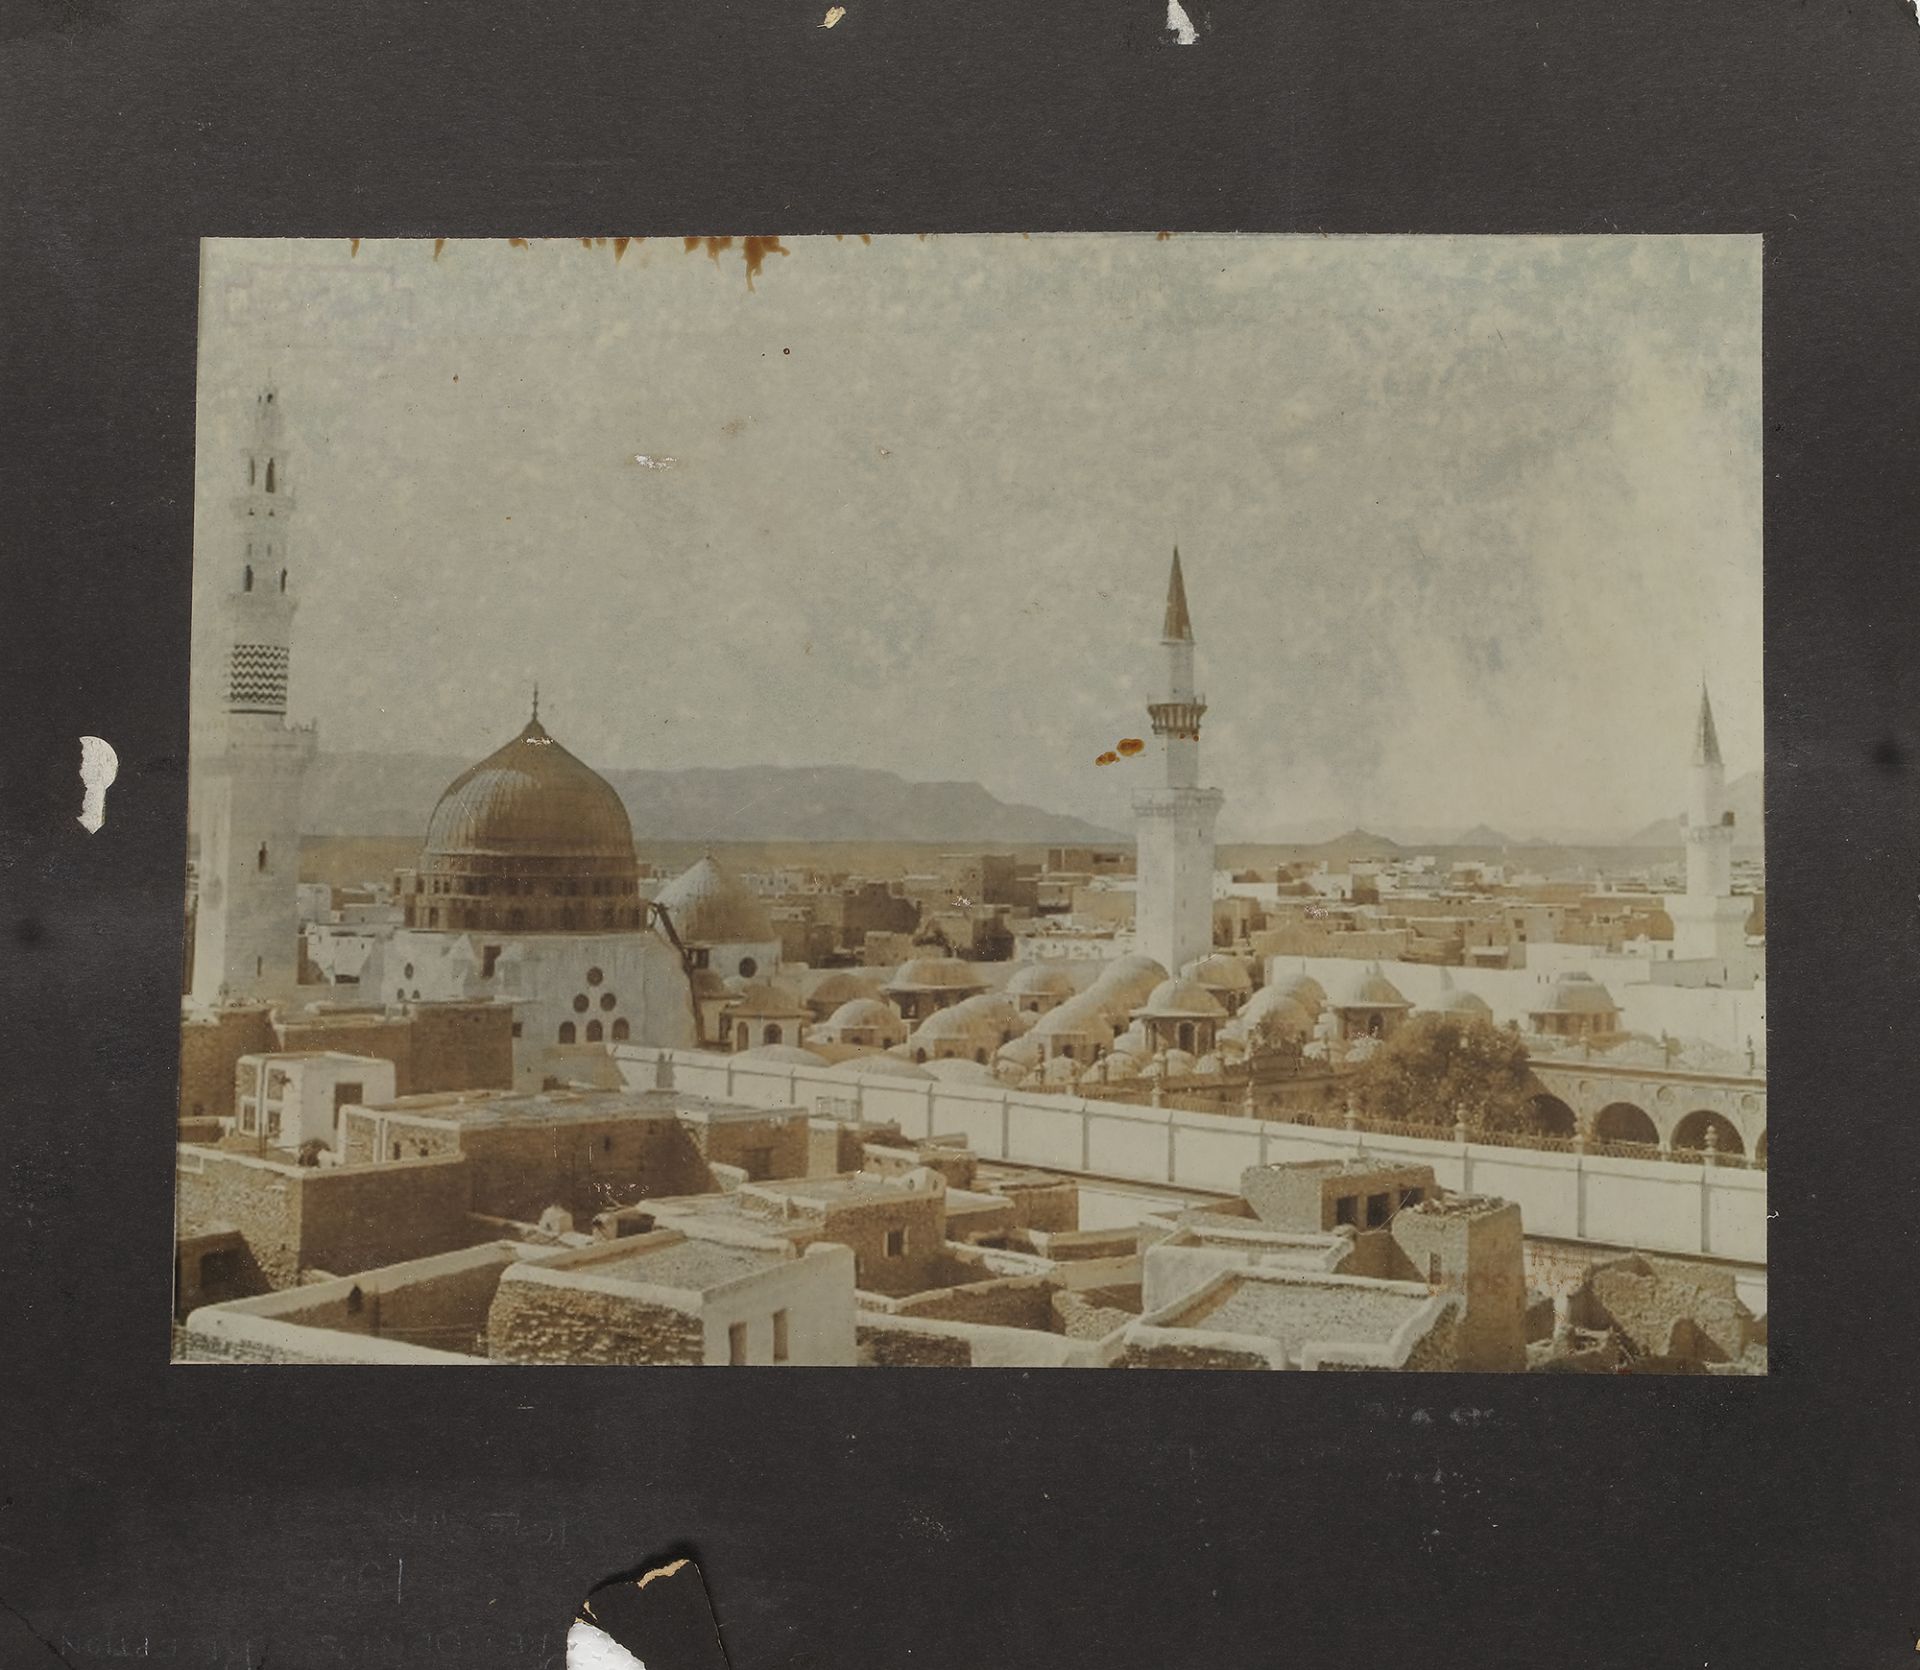 MECCA AND MEDINA, A COLLECTION OF 14 PHOTOGRAPHS DURING THE HAJJ, EARLY 20TH CENTURY - Image 14 of 15